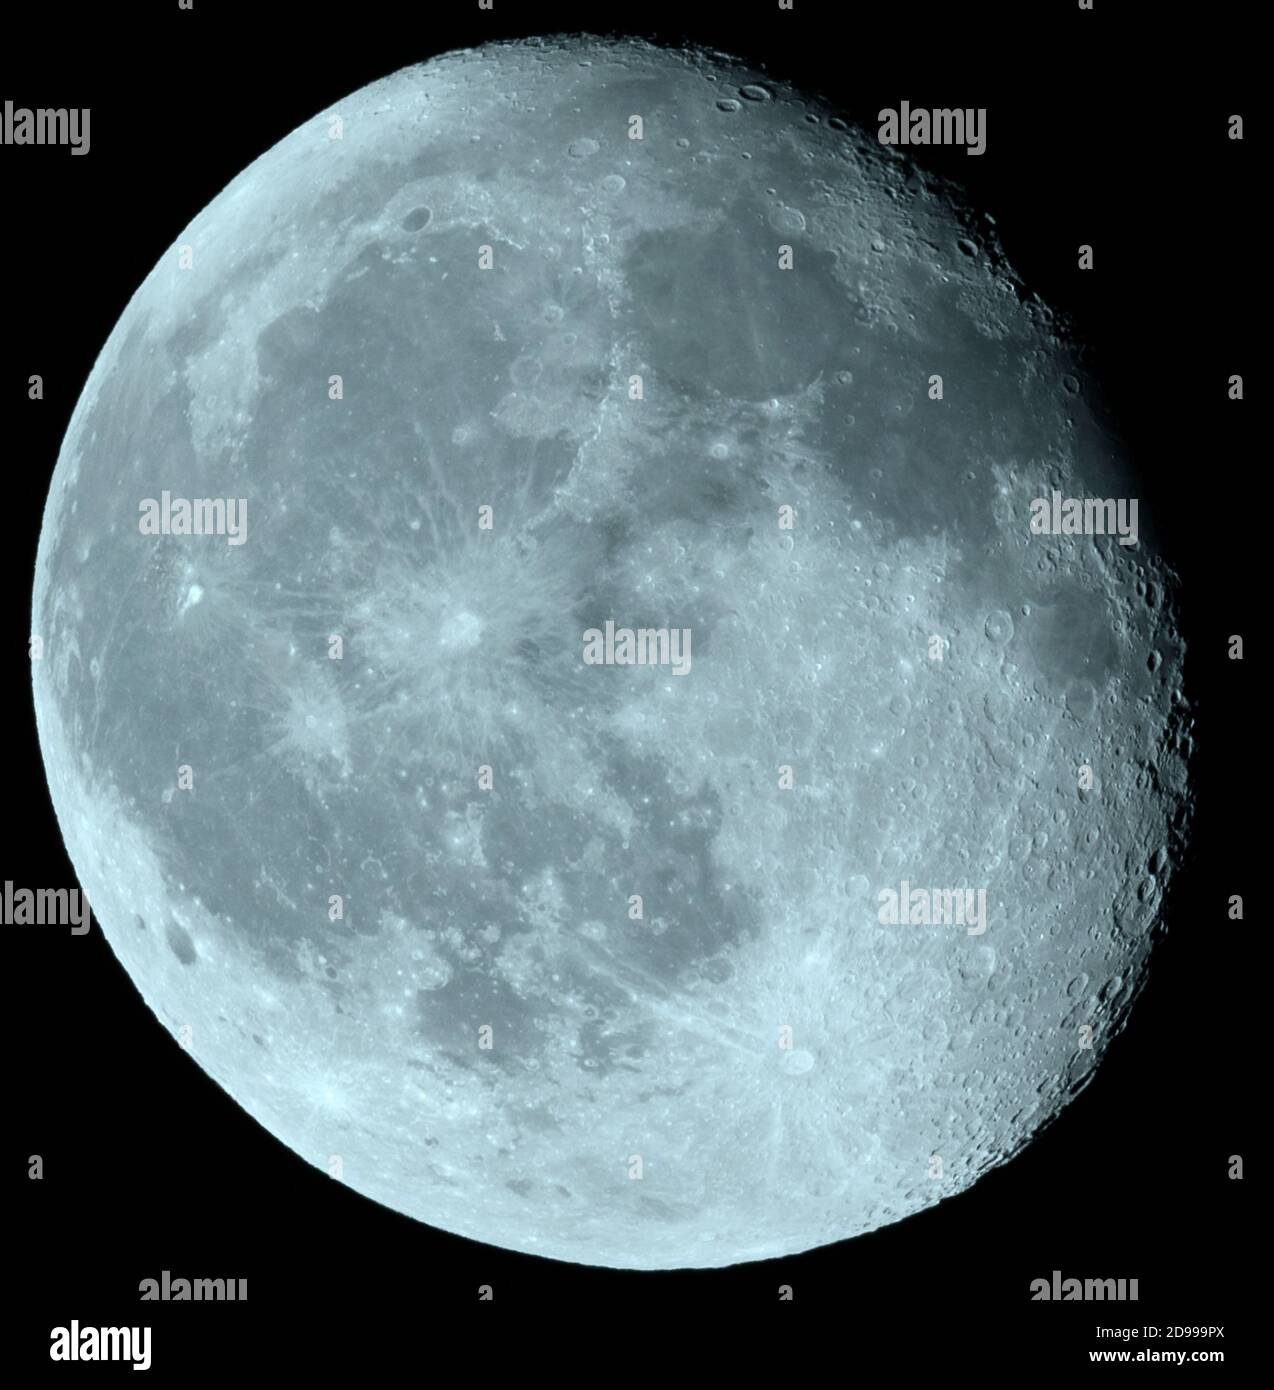 London, UK. 3 November 2020. 90.8% Waning Gibbous Moon with a heavily cratered terminator visible in clear overnight sky. Credit: Malcolm Park/Alamy. Stock Photo